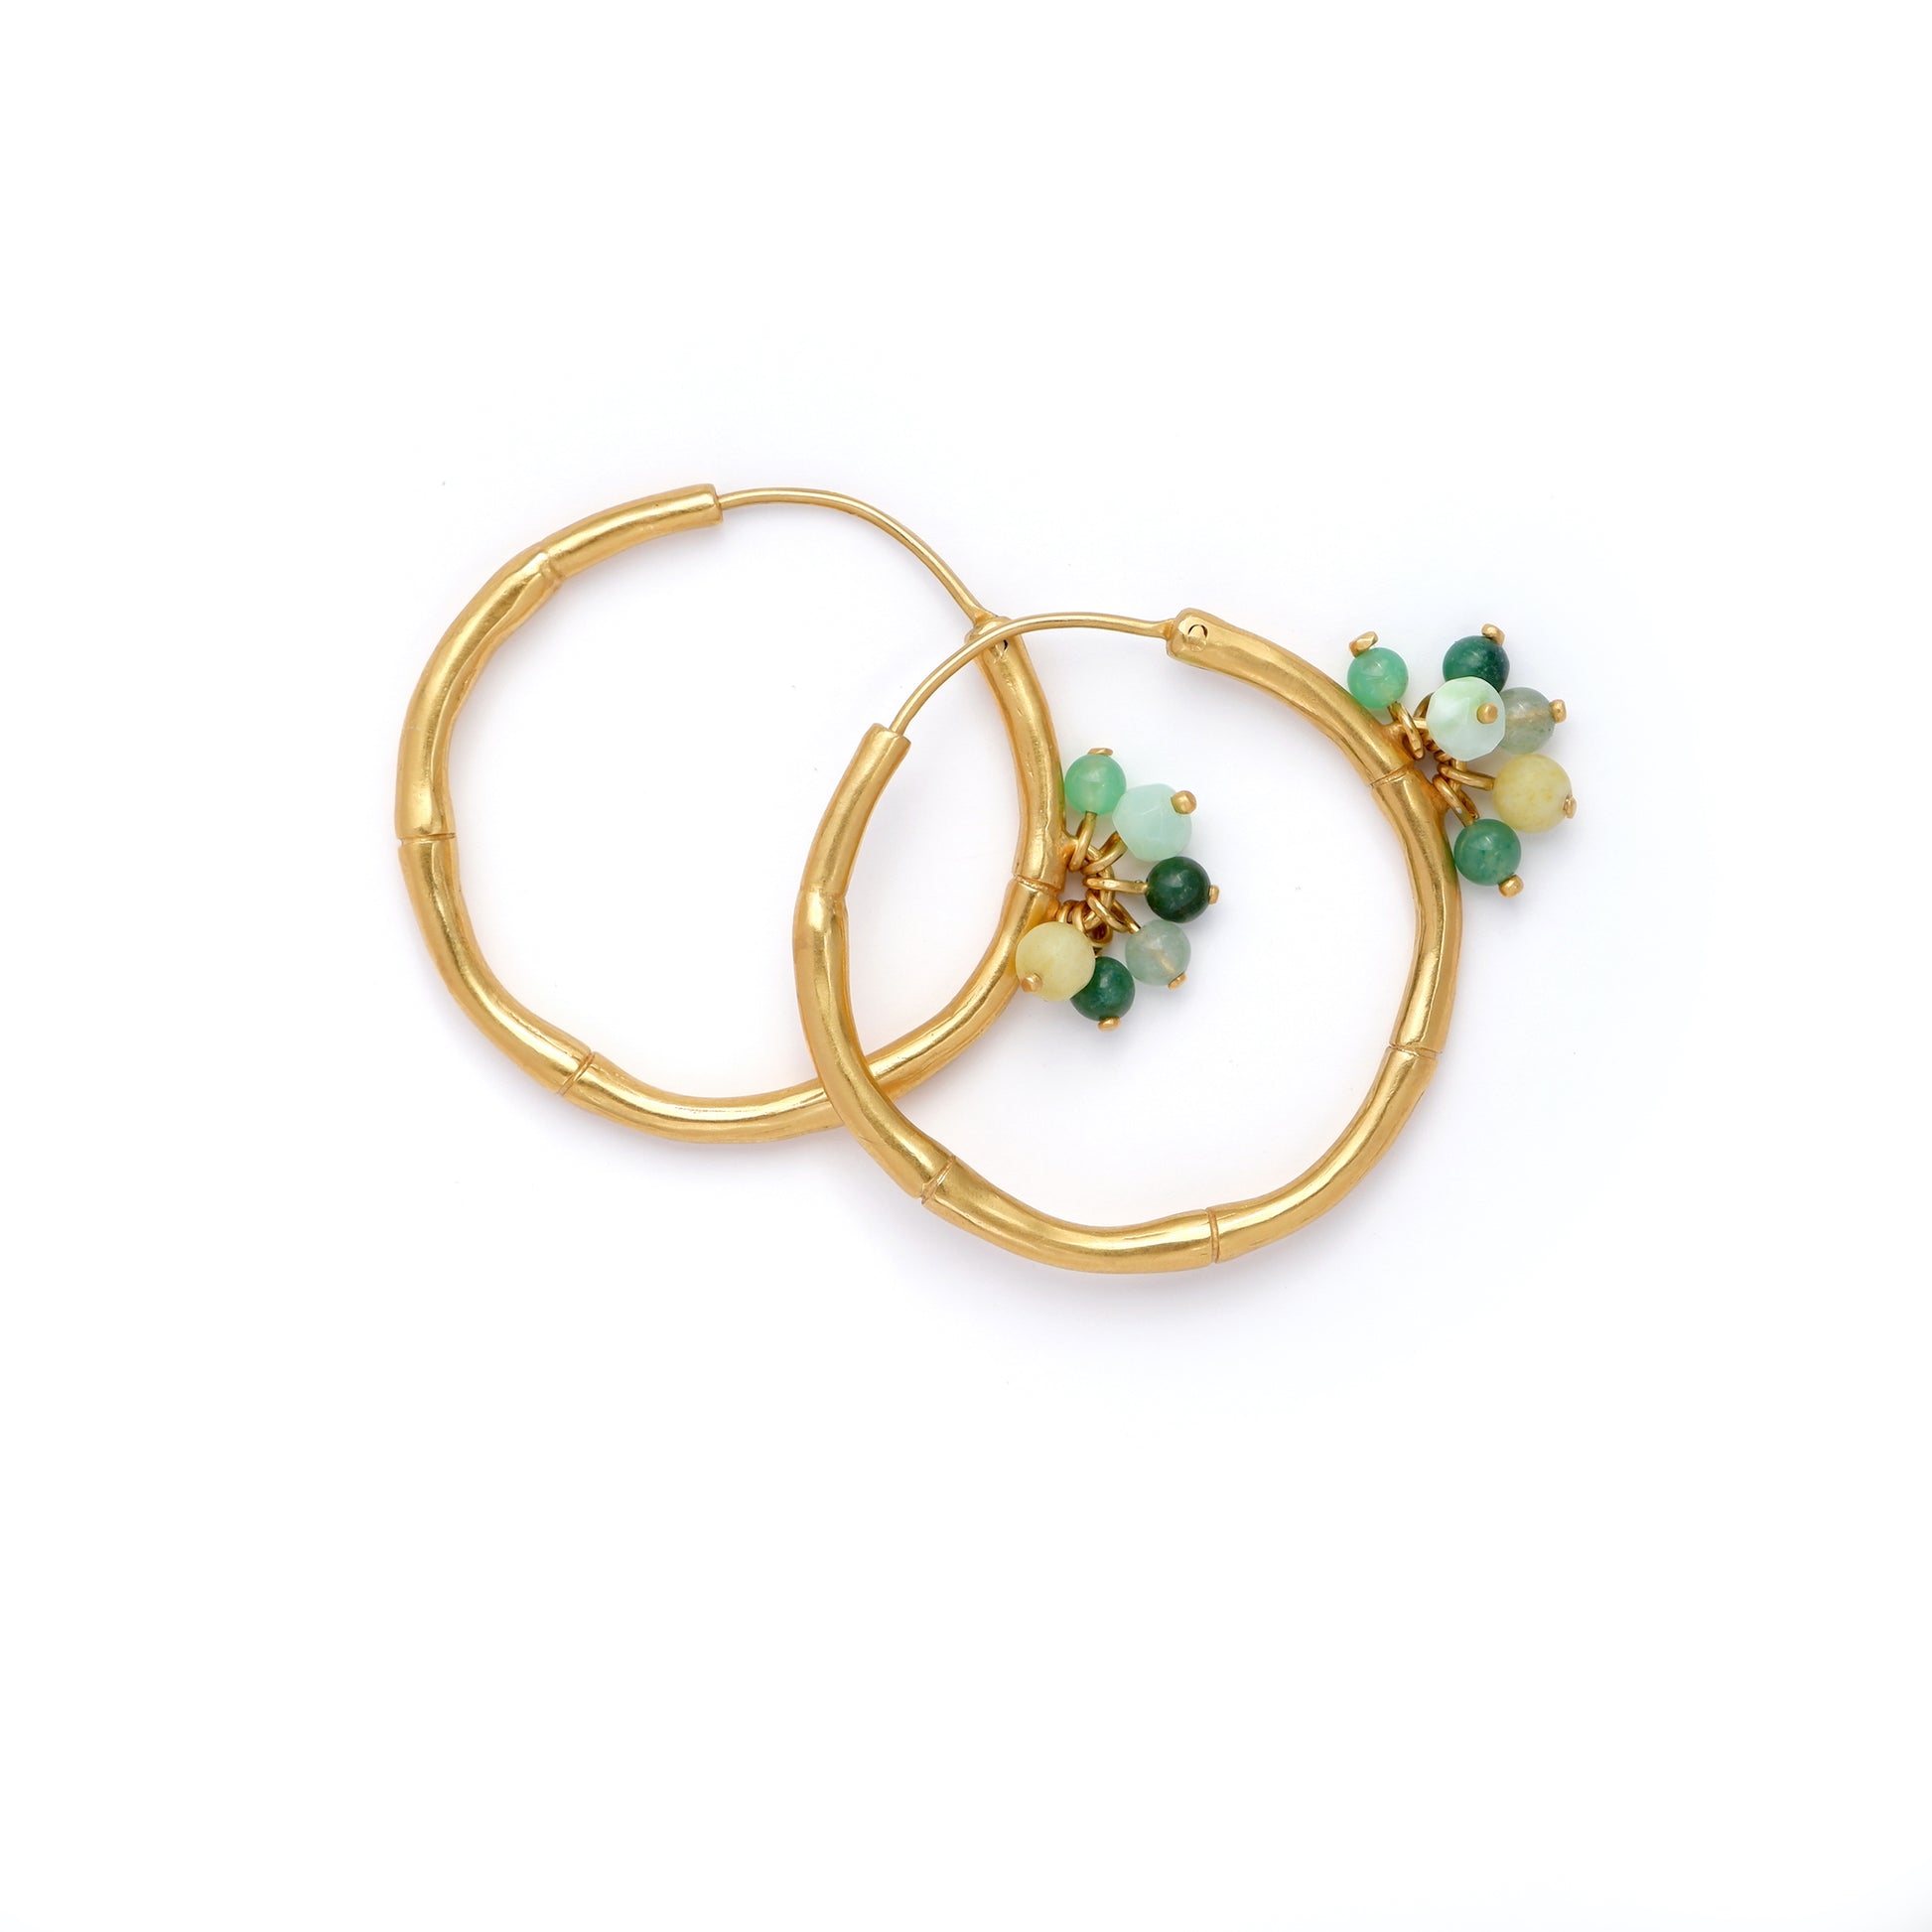 Gold Vermeil Bamboo Hoops small size, green jade, crysoprase gemstone Bauble beads